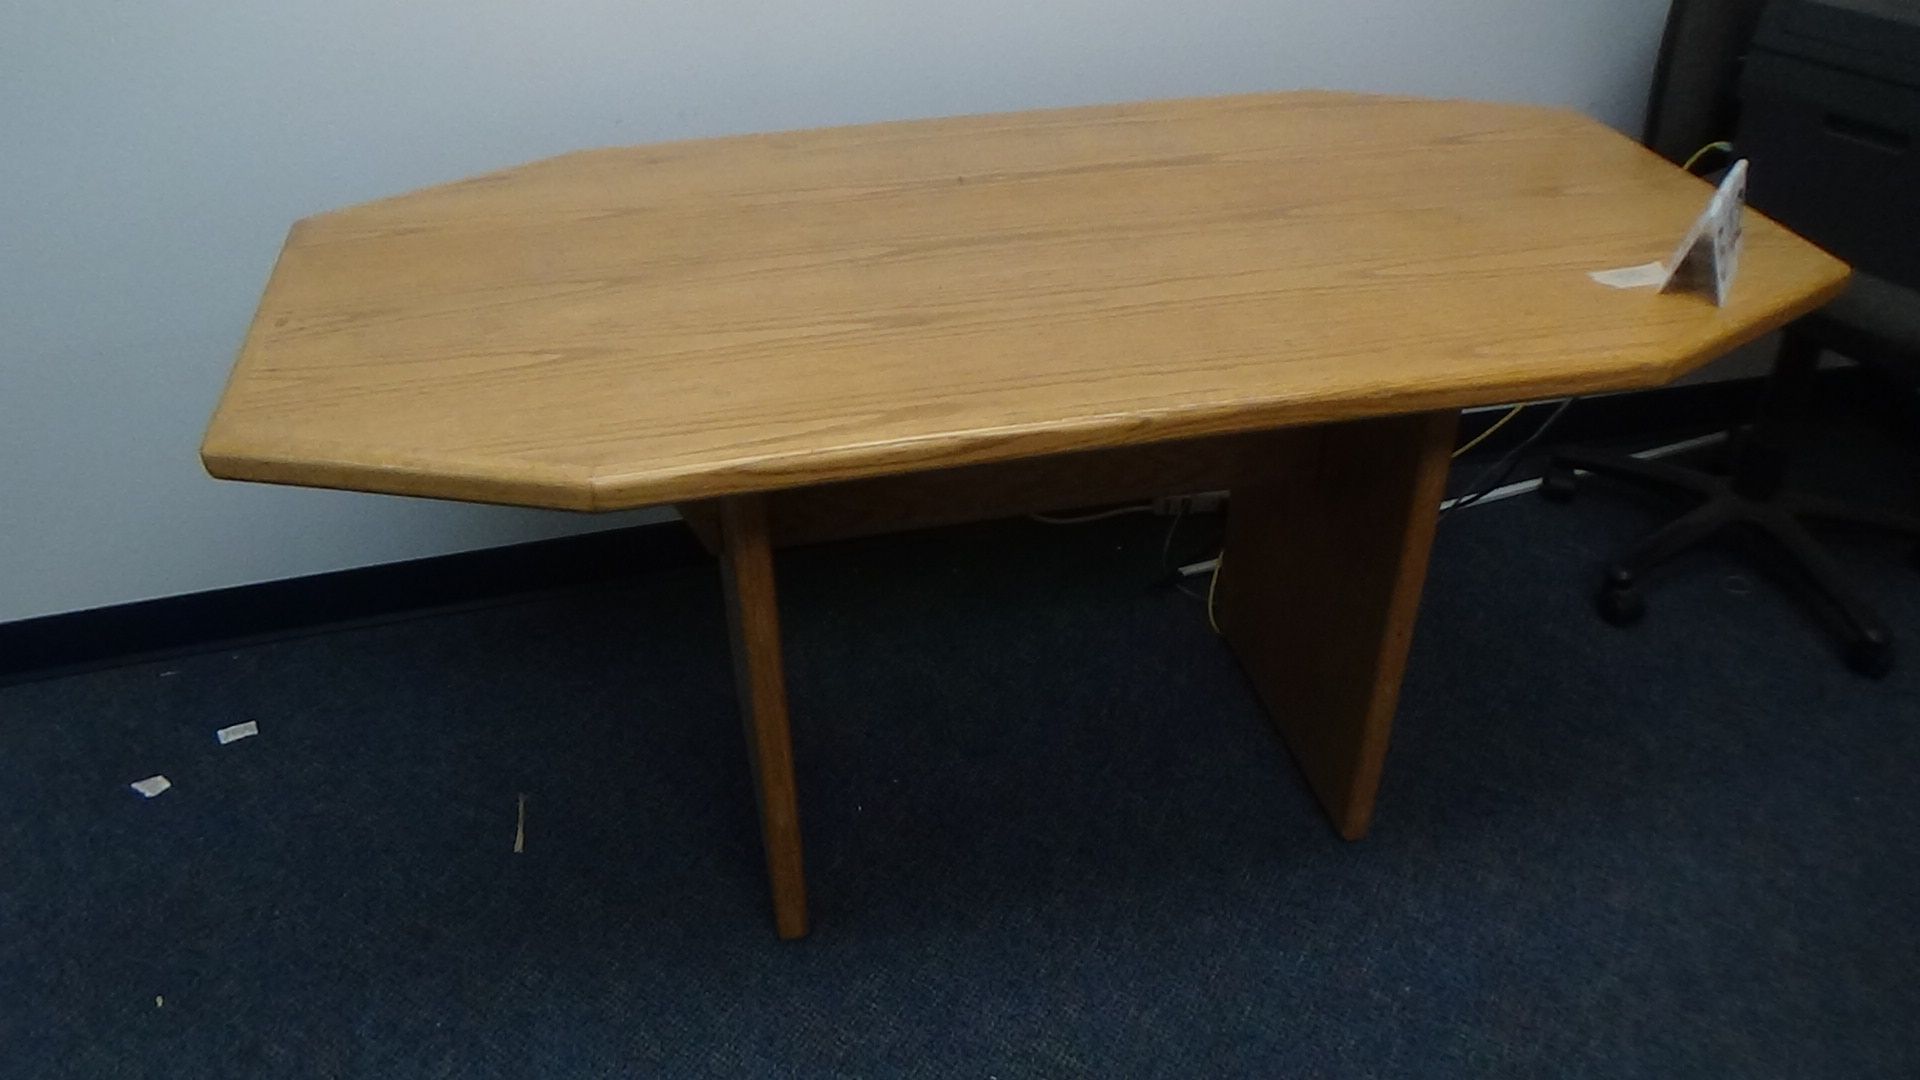 Octagonal wooden table - Image 2 of 3